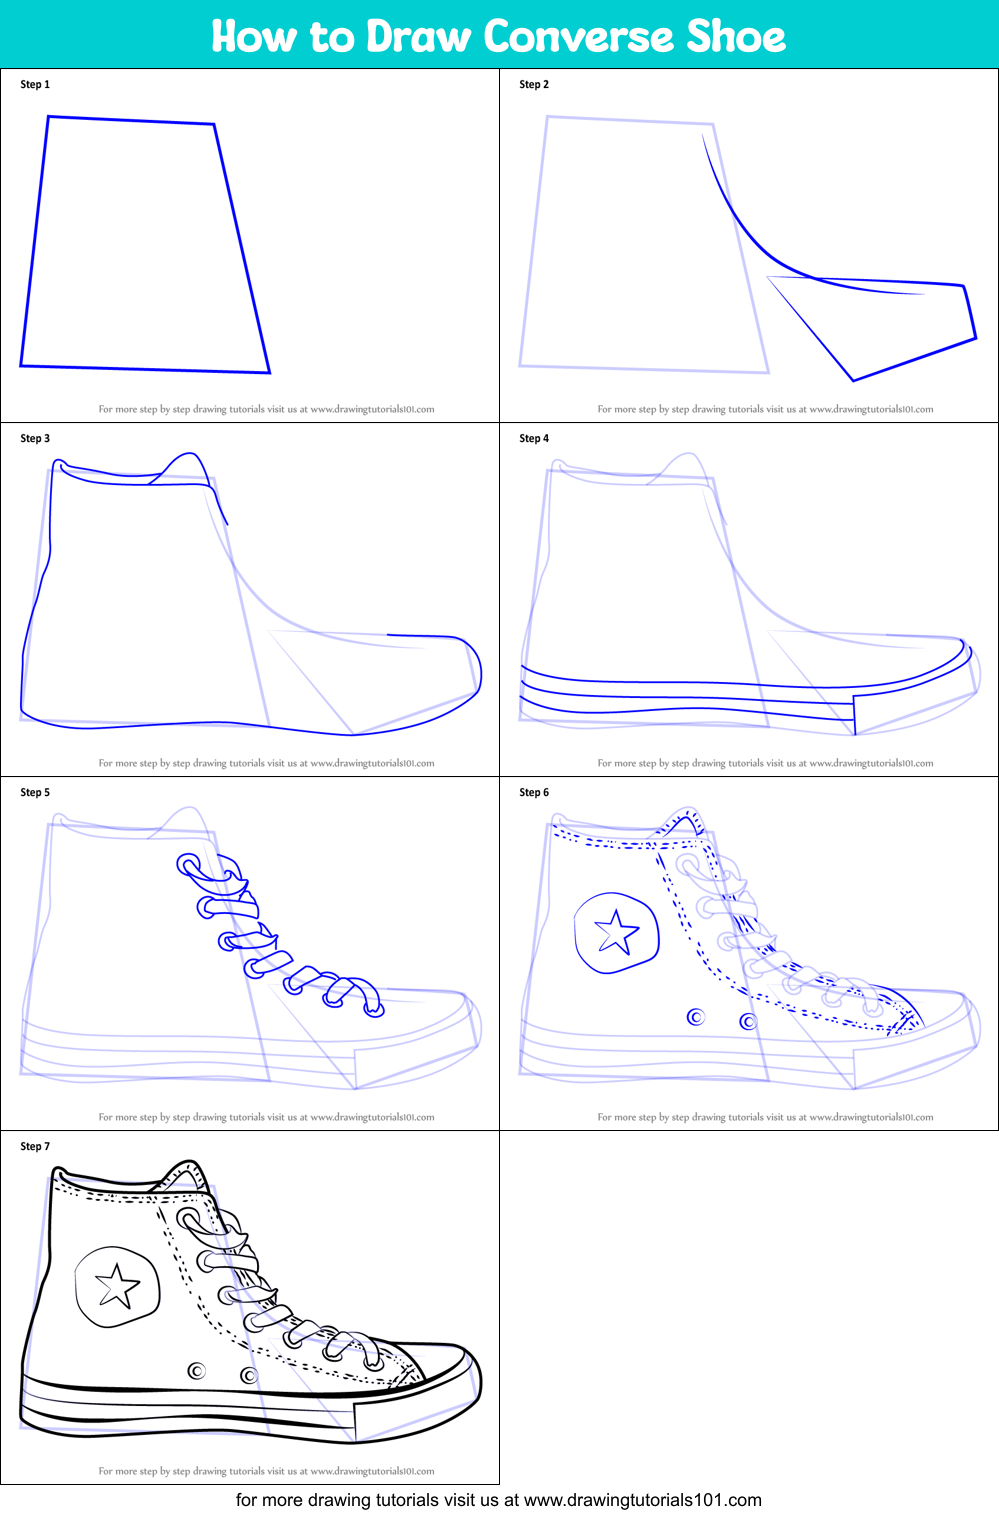 How to Draw Converse Shoe printable step by step drawing sheet